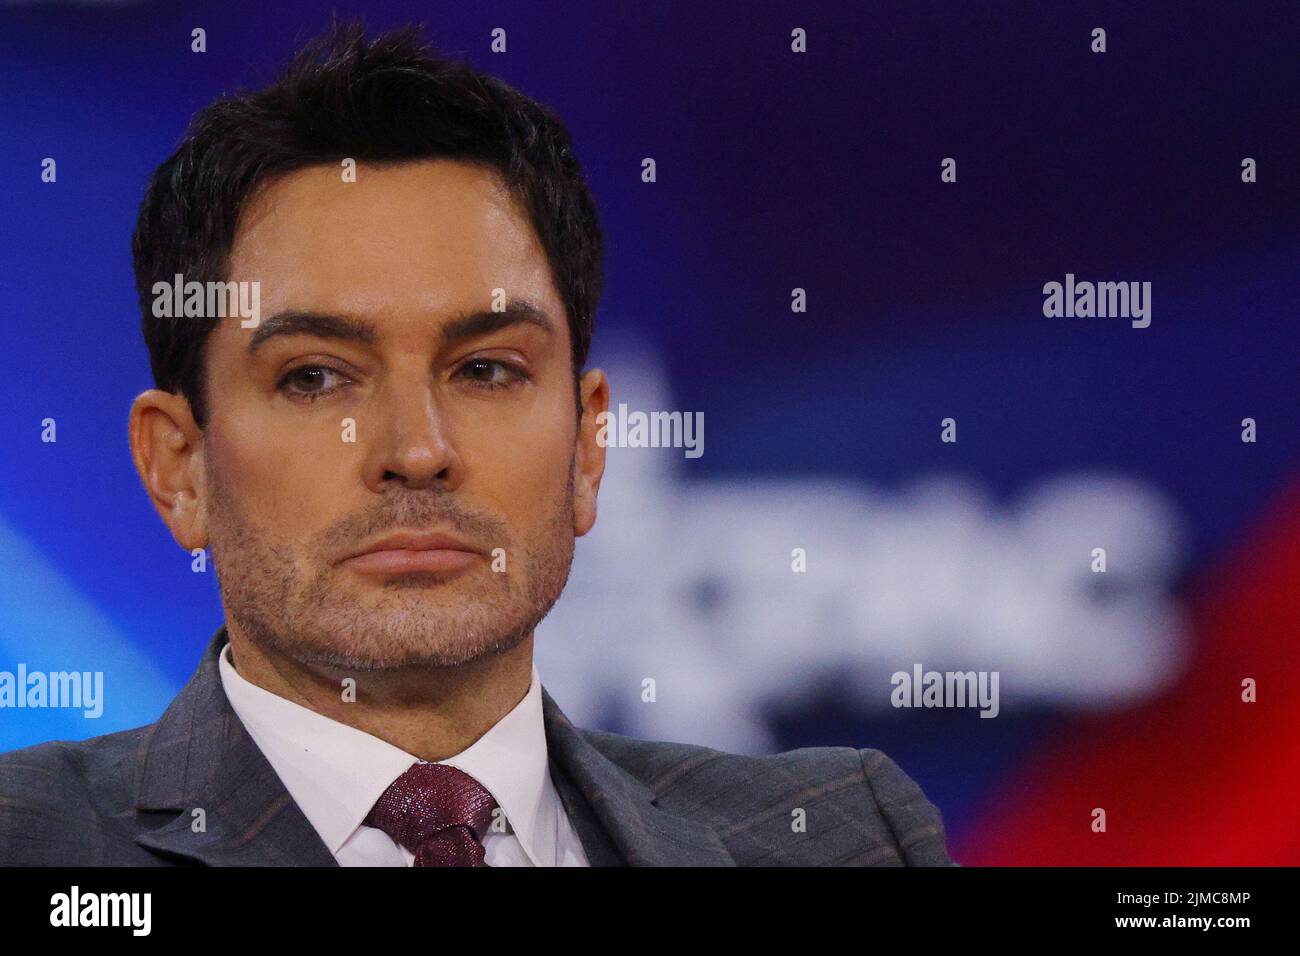 Brandon Straka, who founded #WalkAway and was convicted on charges linked to the January 6 attacks on the U.S. Capitol, attends the Conservative Political Action Conference (CPAC) in Dallas, Texas, U.S., August 5, 2022.  REUTERS/Brian Snyder Stock Photo